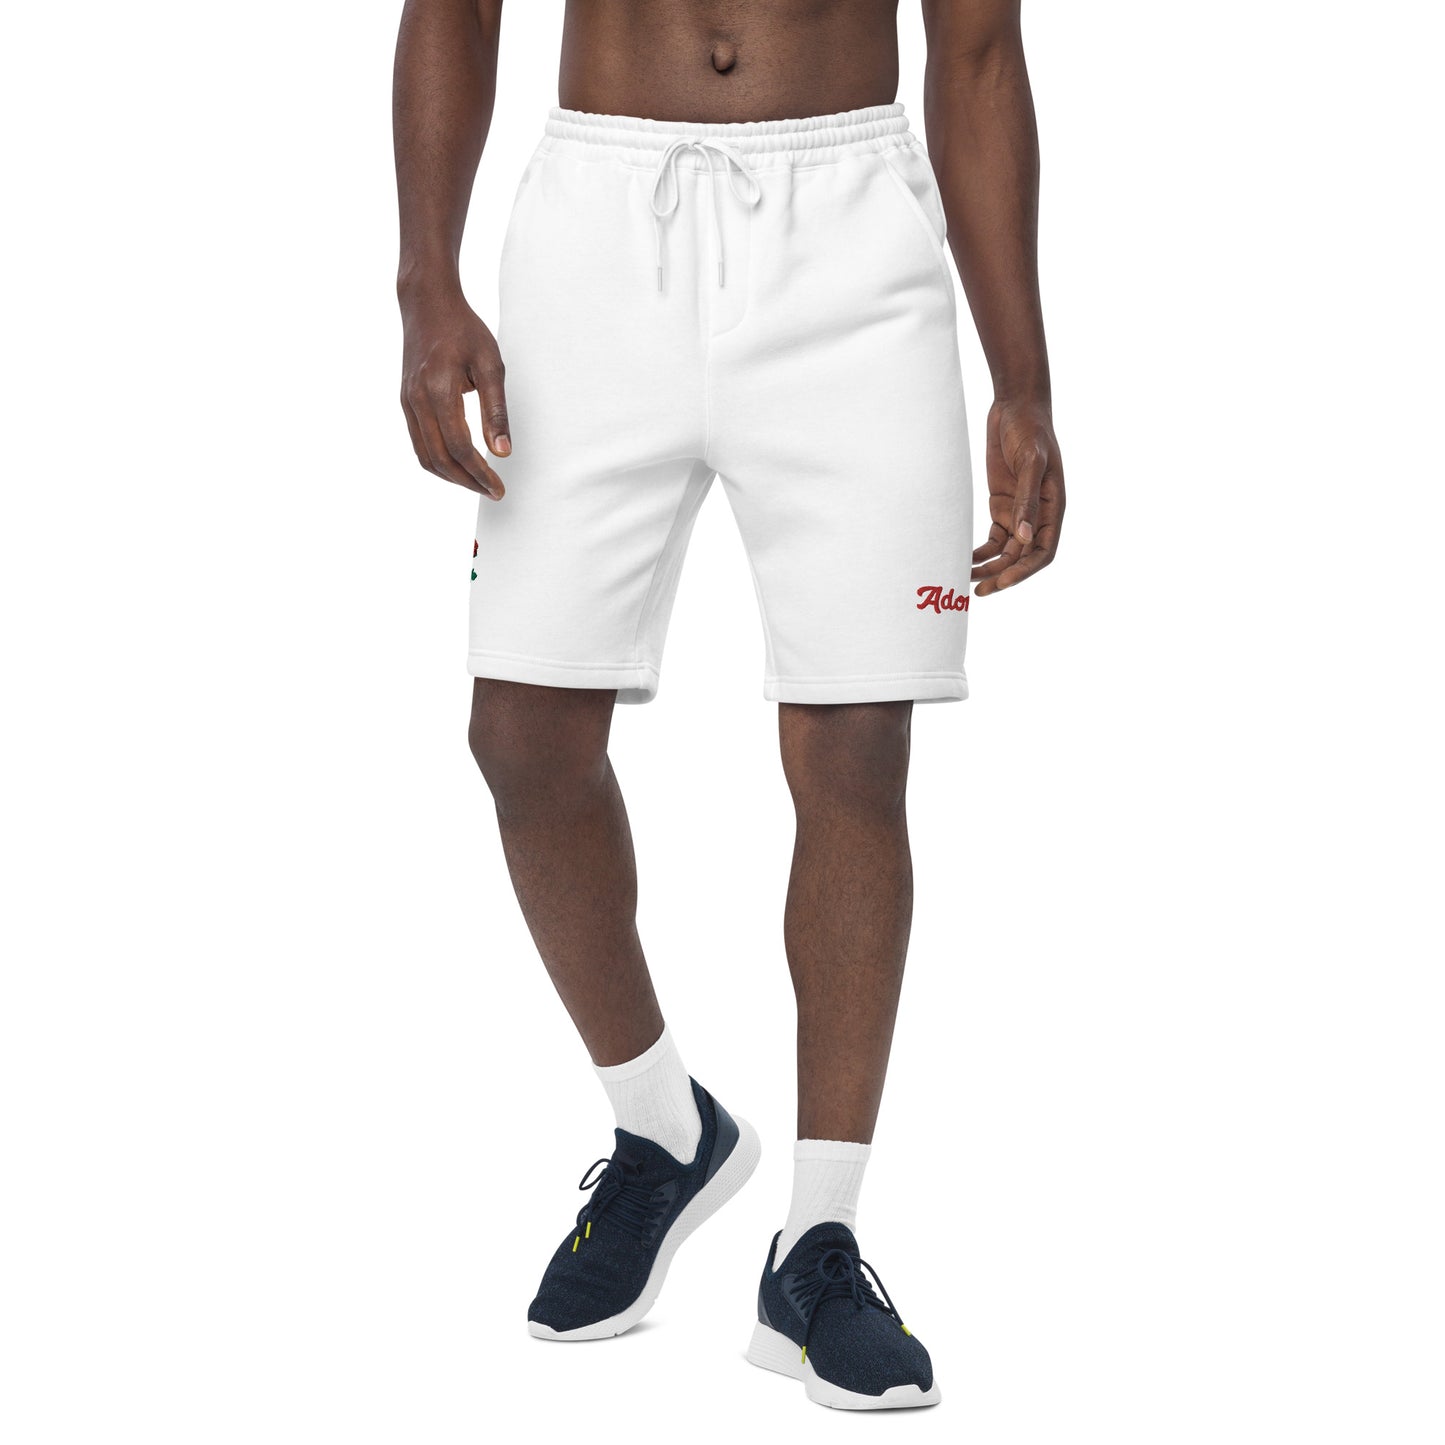 Adonis-Creations - Men's Casual Embroidered Shorts